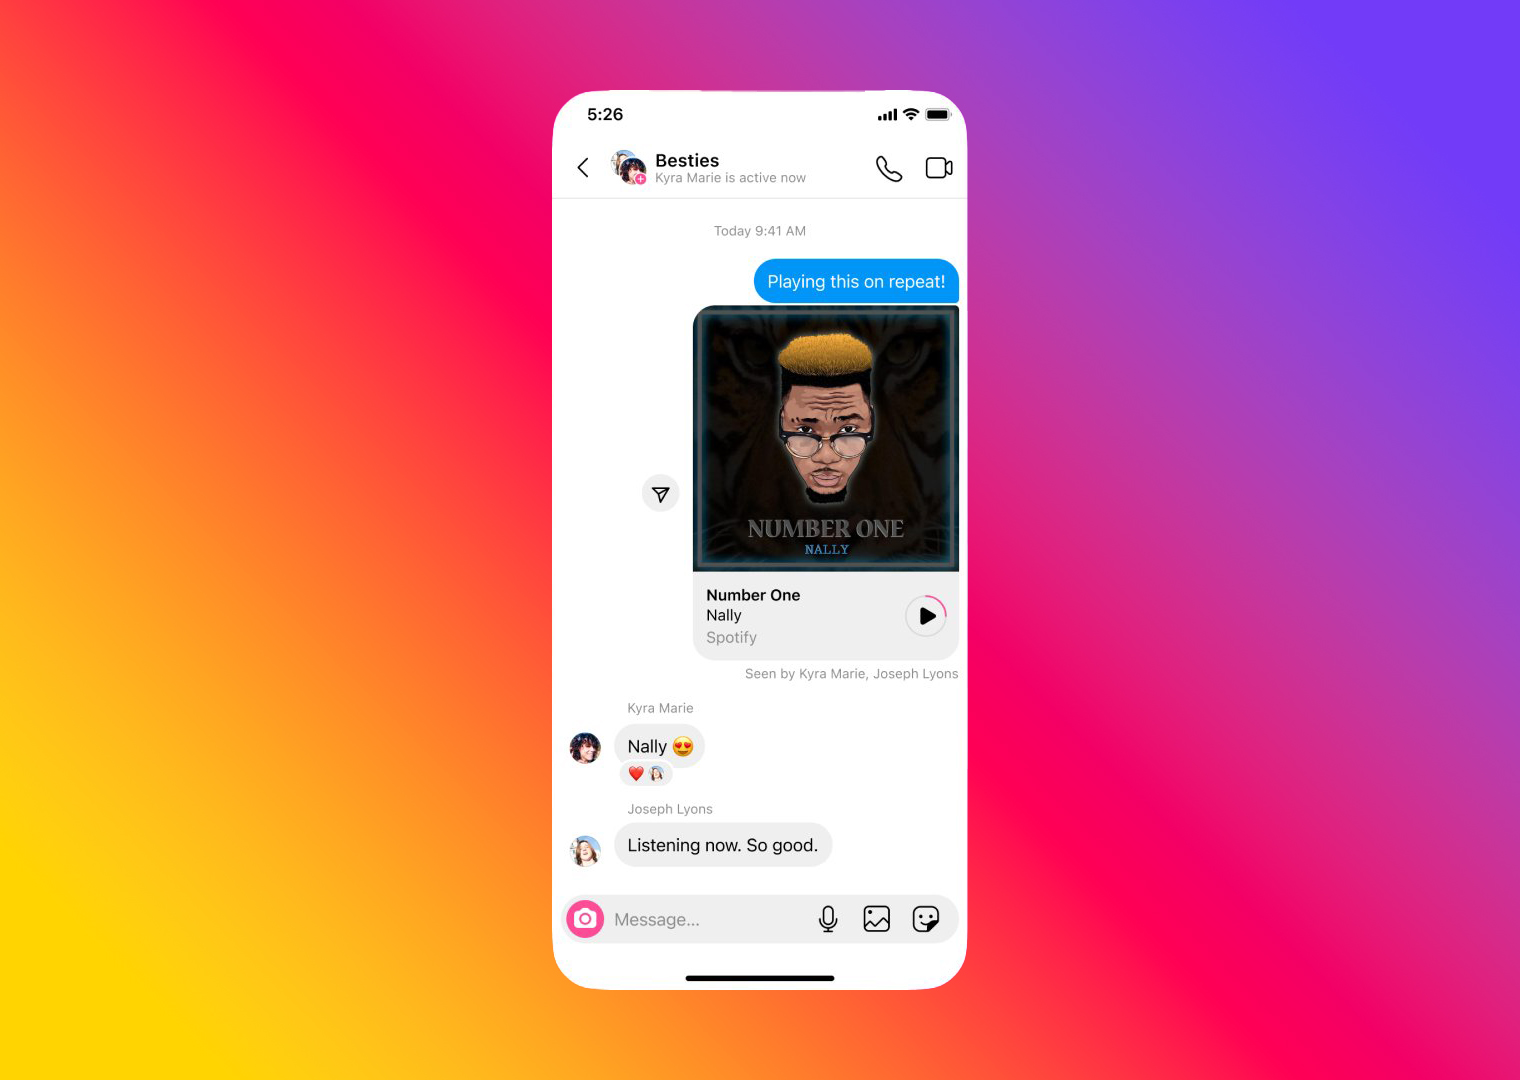 Share song previews from Spotify, Apple Music and Amazon Music to Instagram Messenger